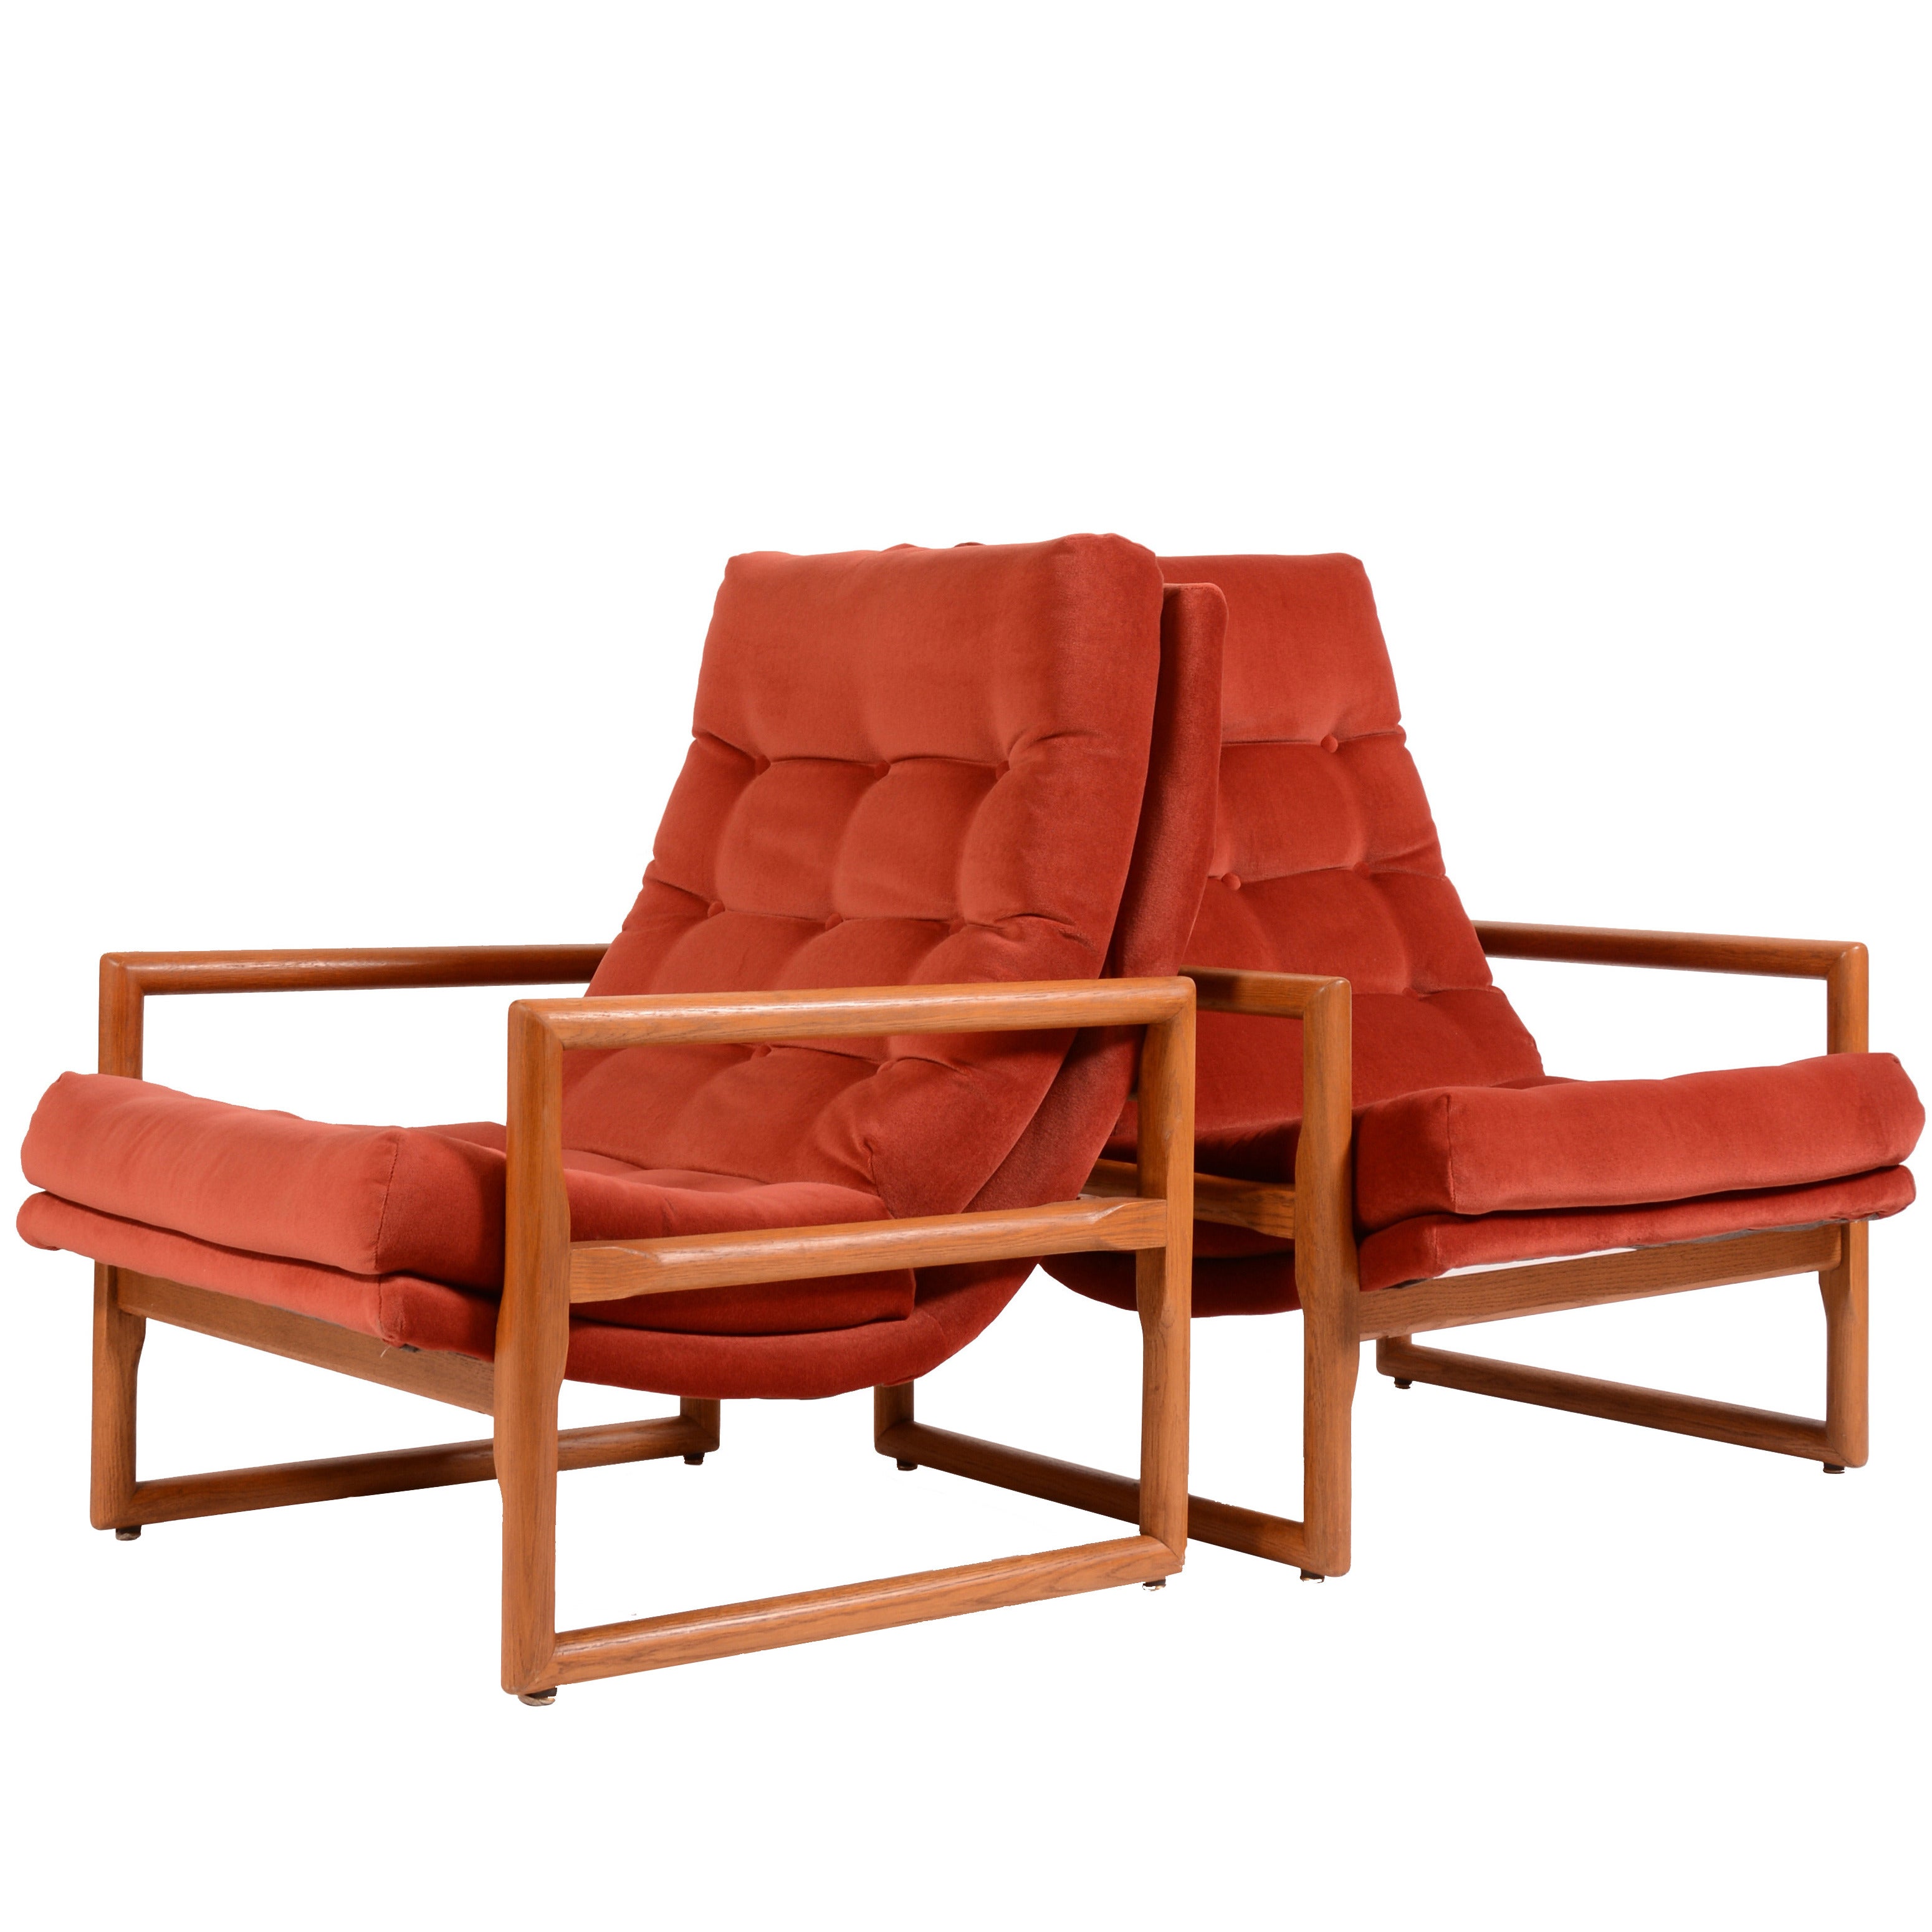 Milo Baughman for Thayer Coggin High Backed Scoop, Cube, Sling Lounge Chairs